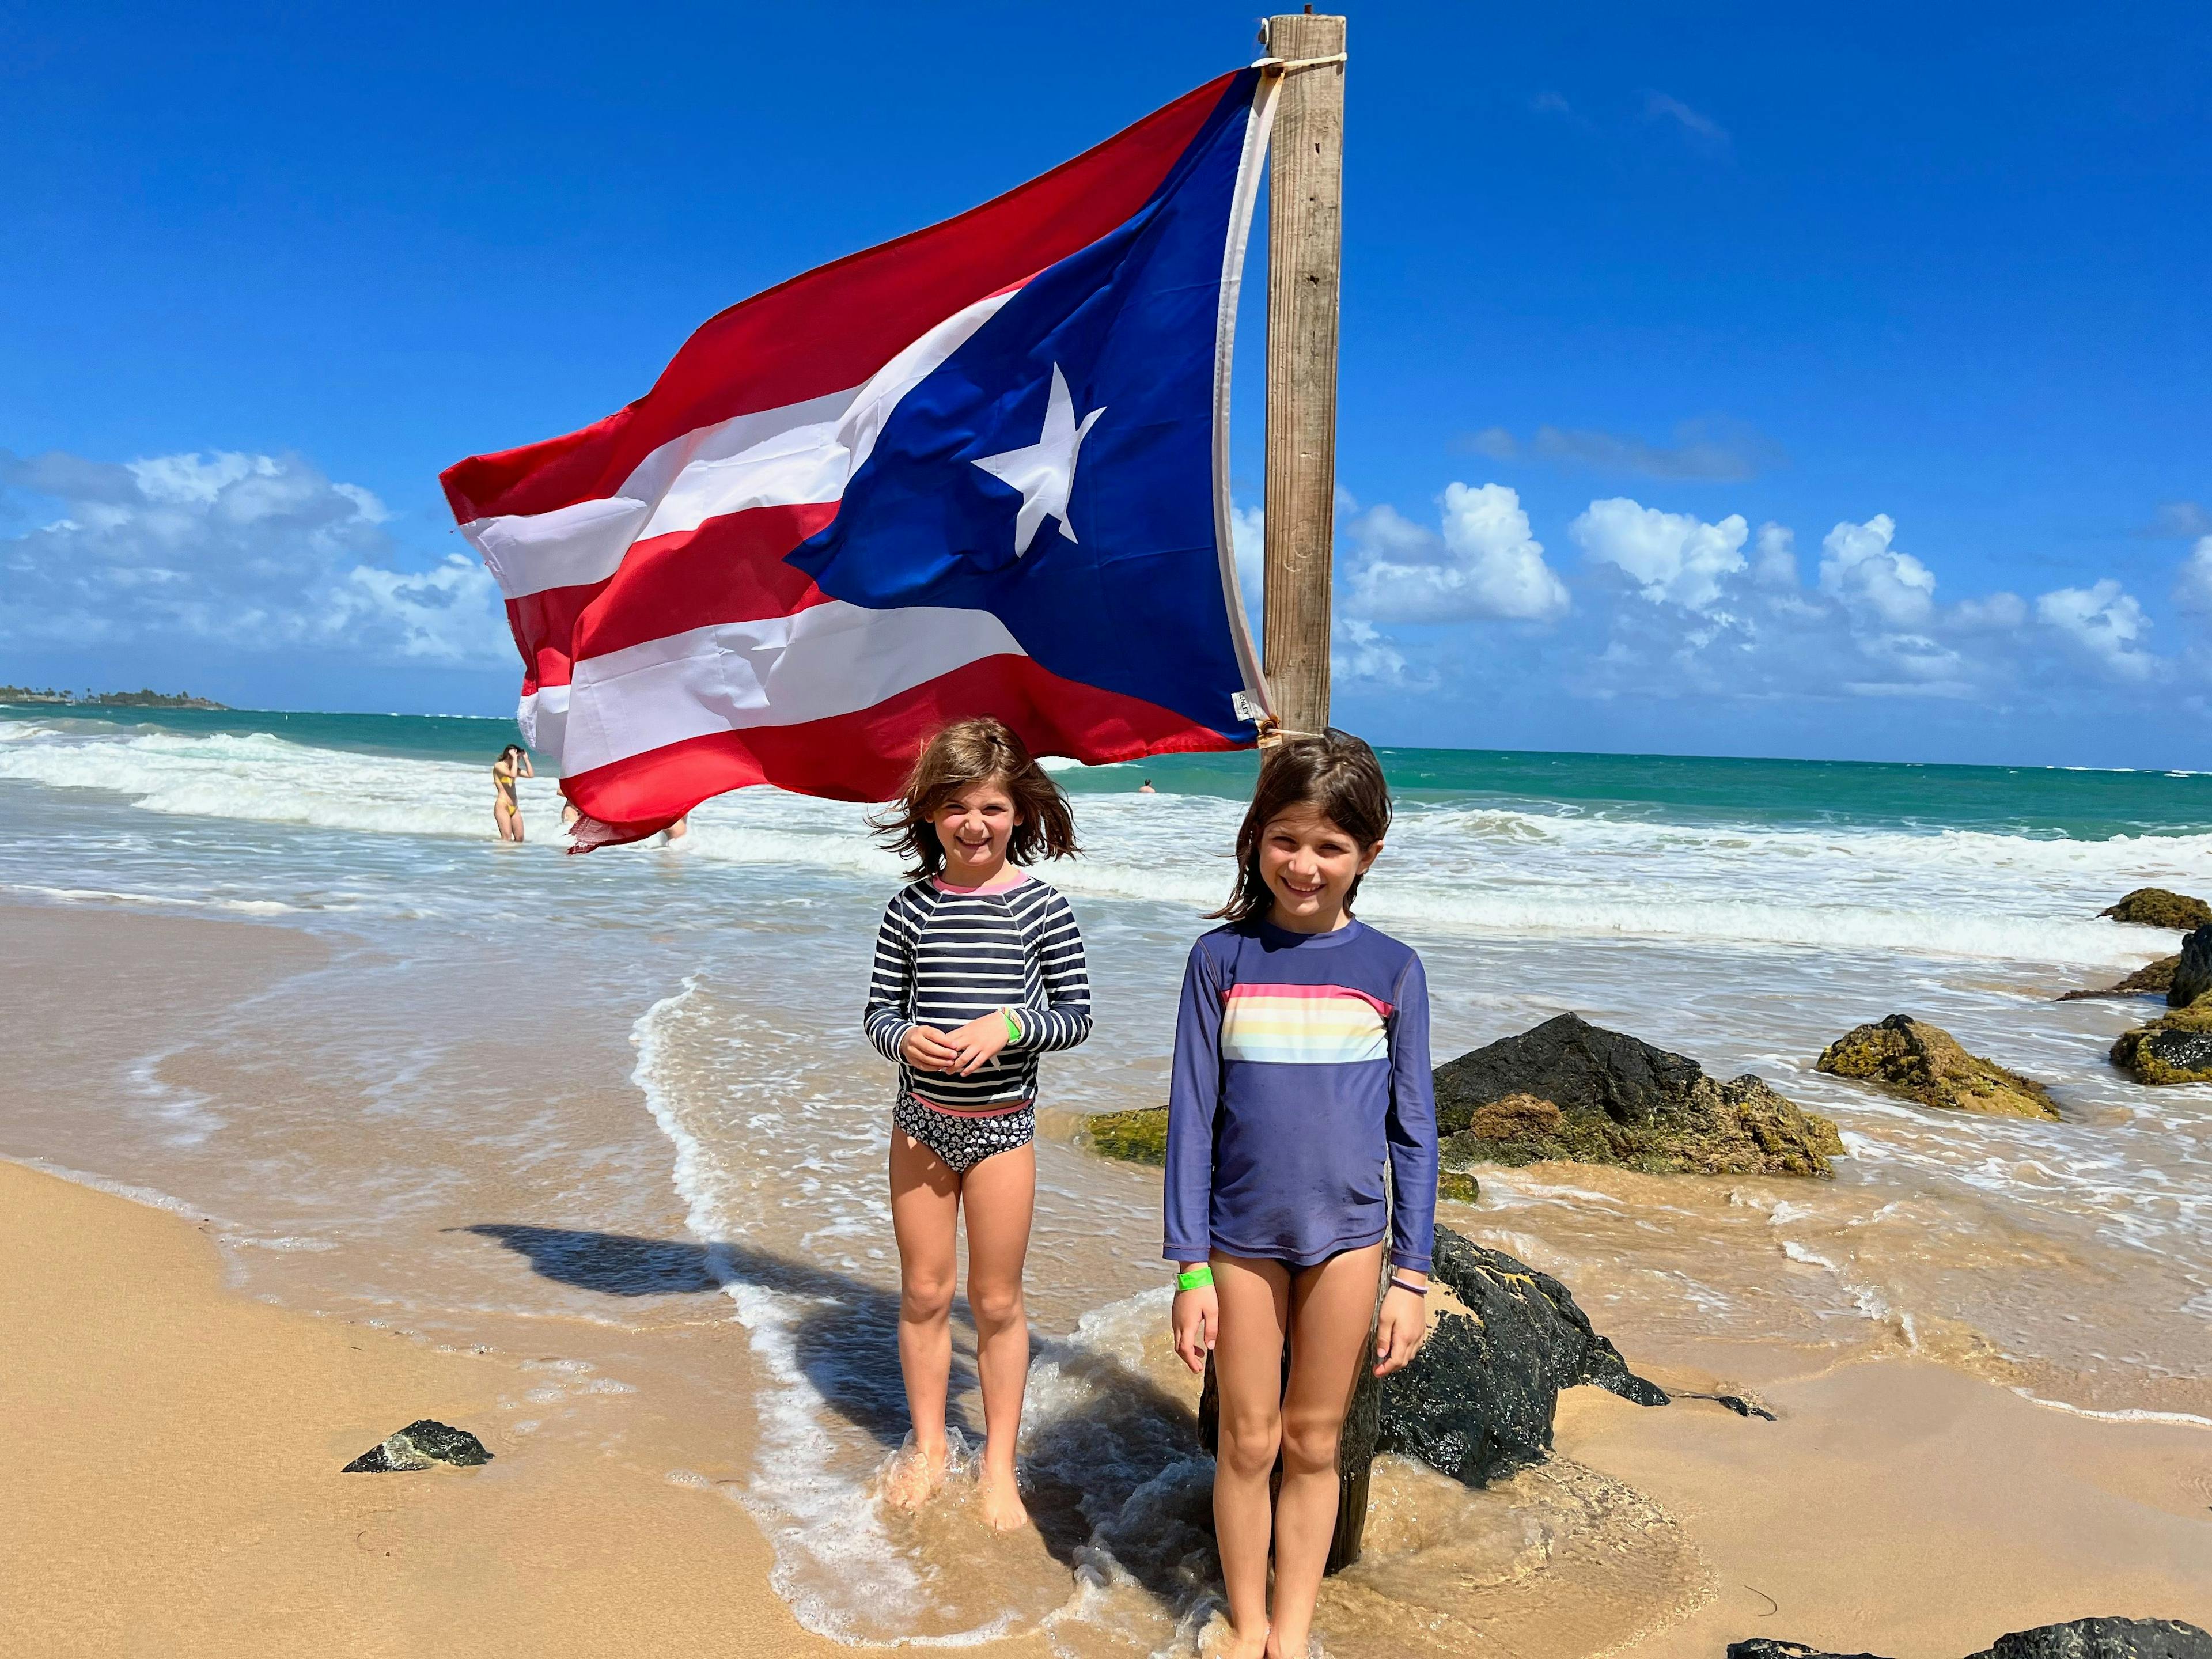 they won't remember the flag of puerto rico